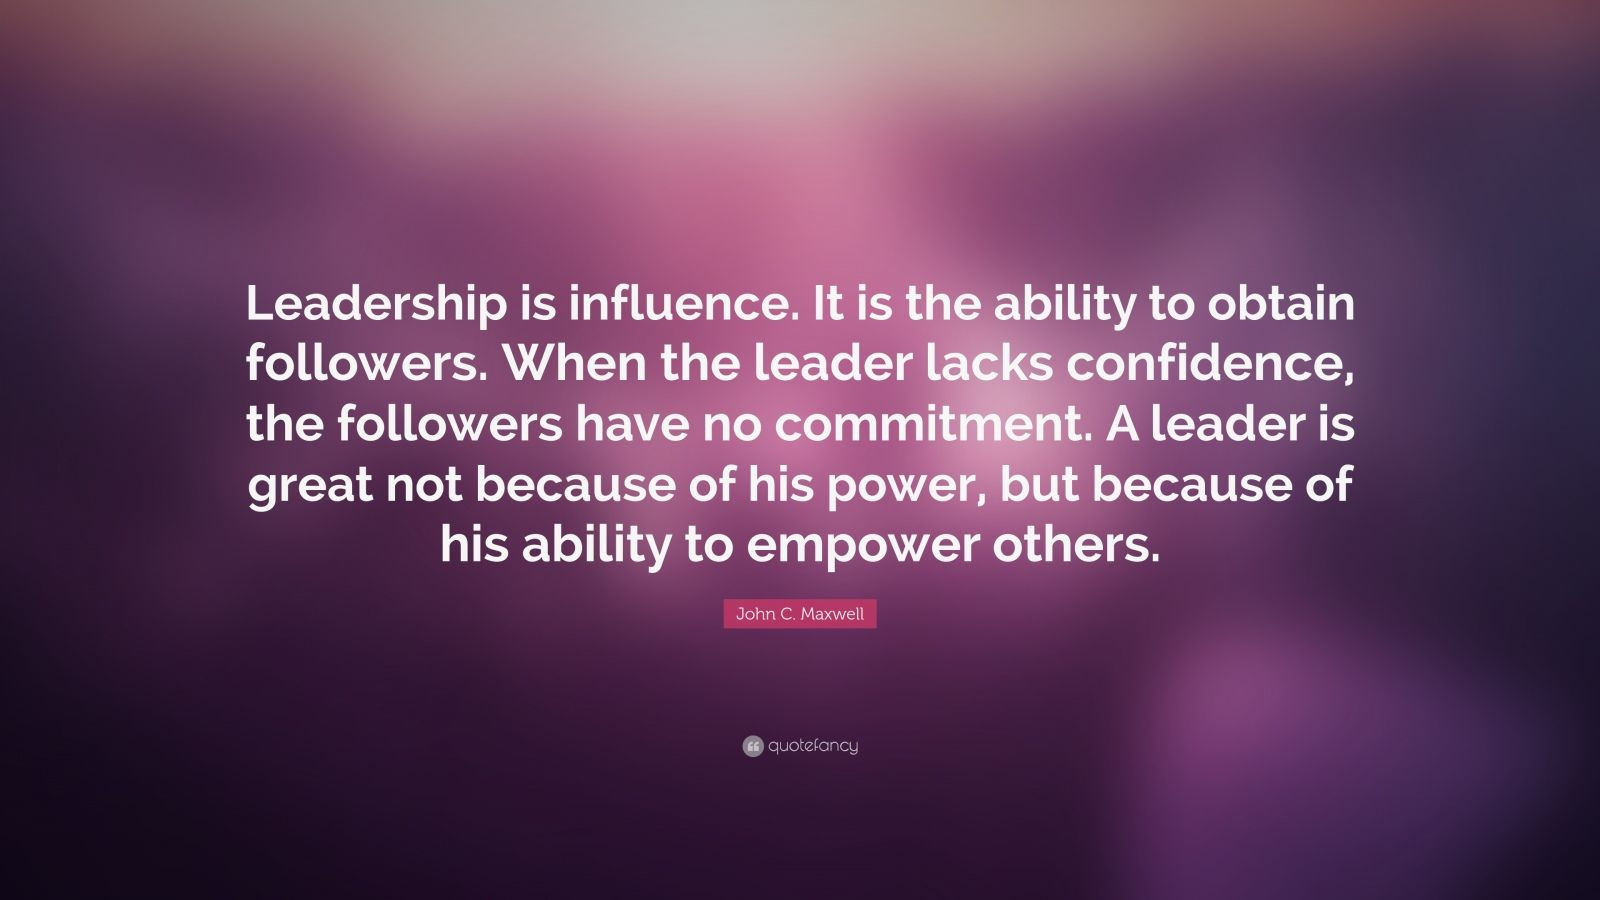 Leadership Is Influence Quote
 John C Maxwell Quote “Leadership is influence It is the